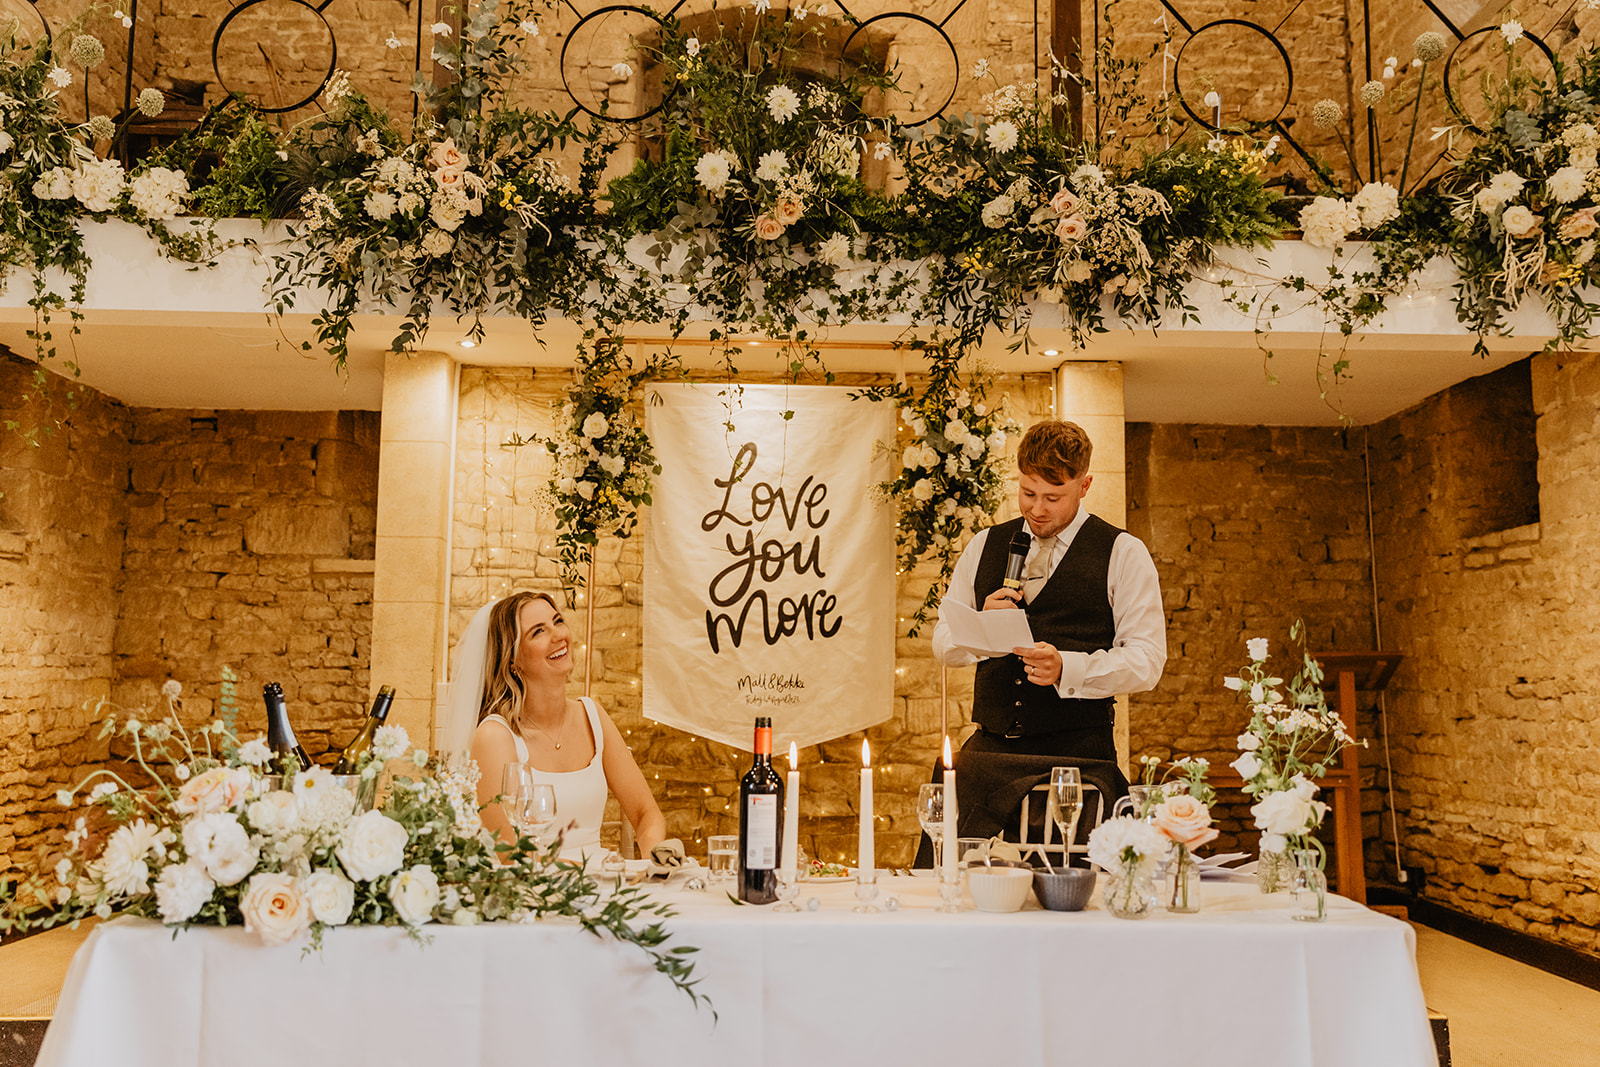 Reception speeches at a Great Tythe Barn Wedding, Cotswolds. By Olive Joy Photography.